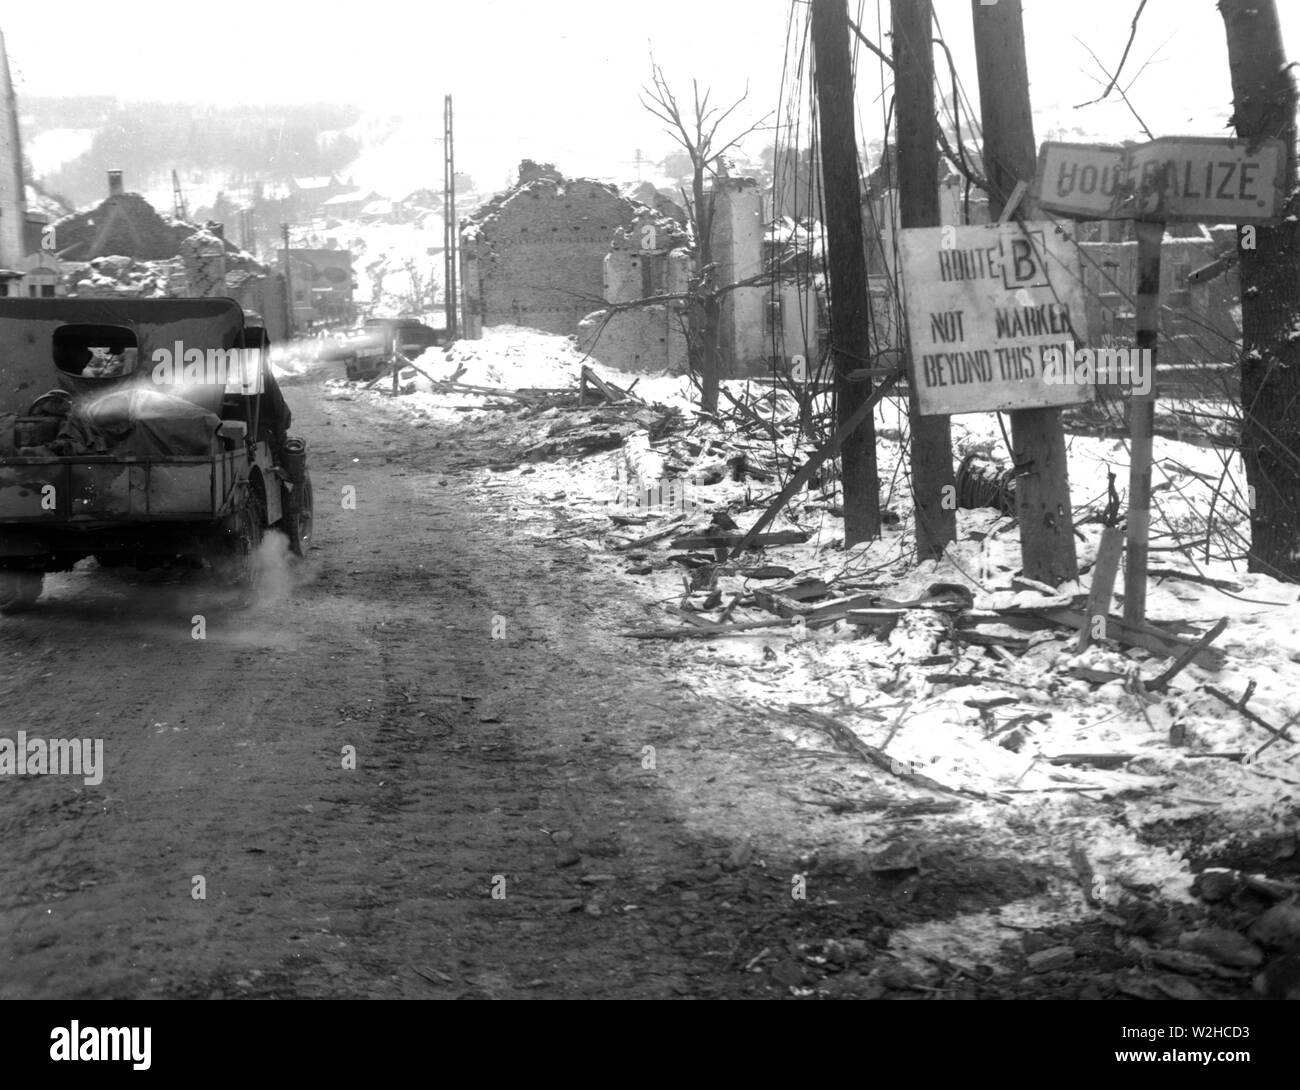 Original caption: An American jeep enters the shell-torn town of Houffalize, Belgium, by the main road. The town was retaken from the Germans by the 2nd Armored Division. 1/18/45 Stock Photo